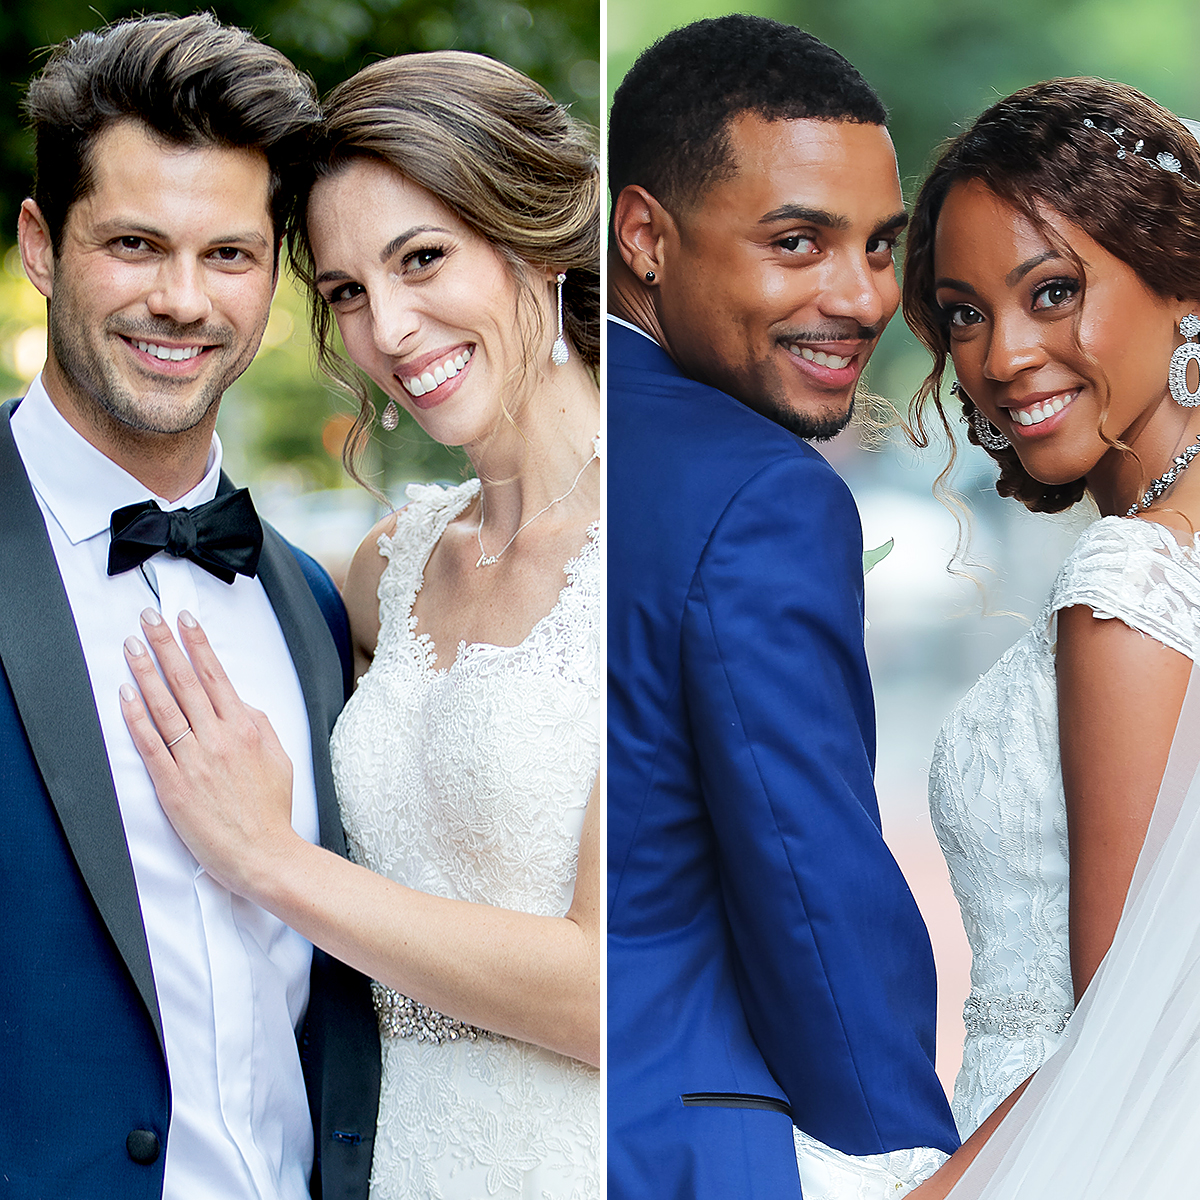 Married at First Sight' Season 10: Meet the Couples